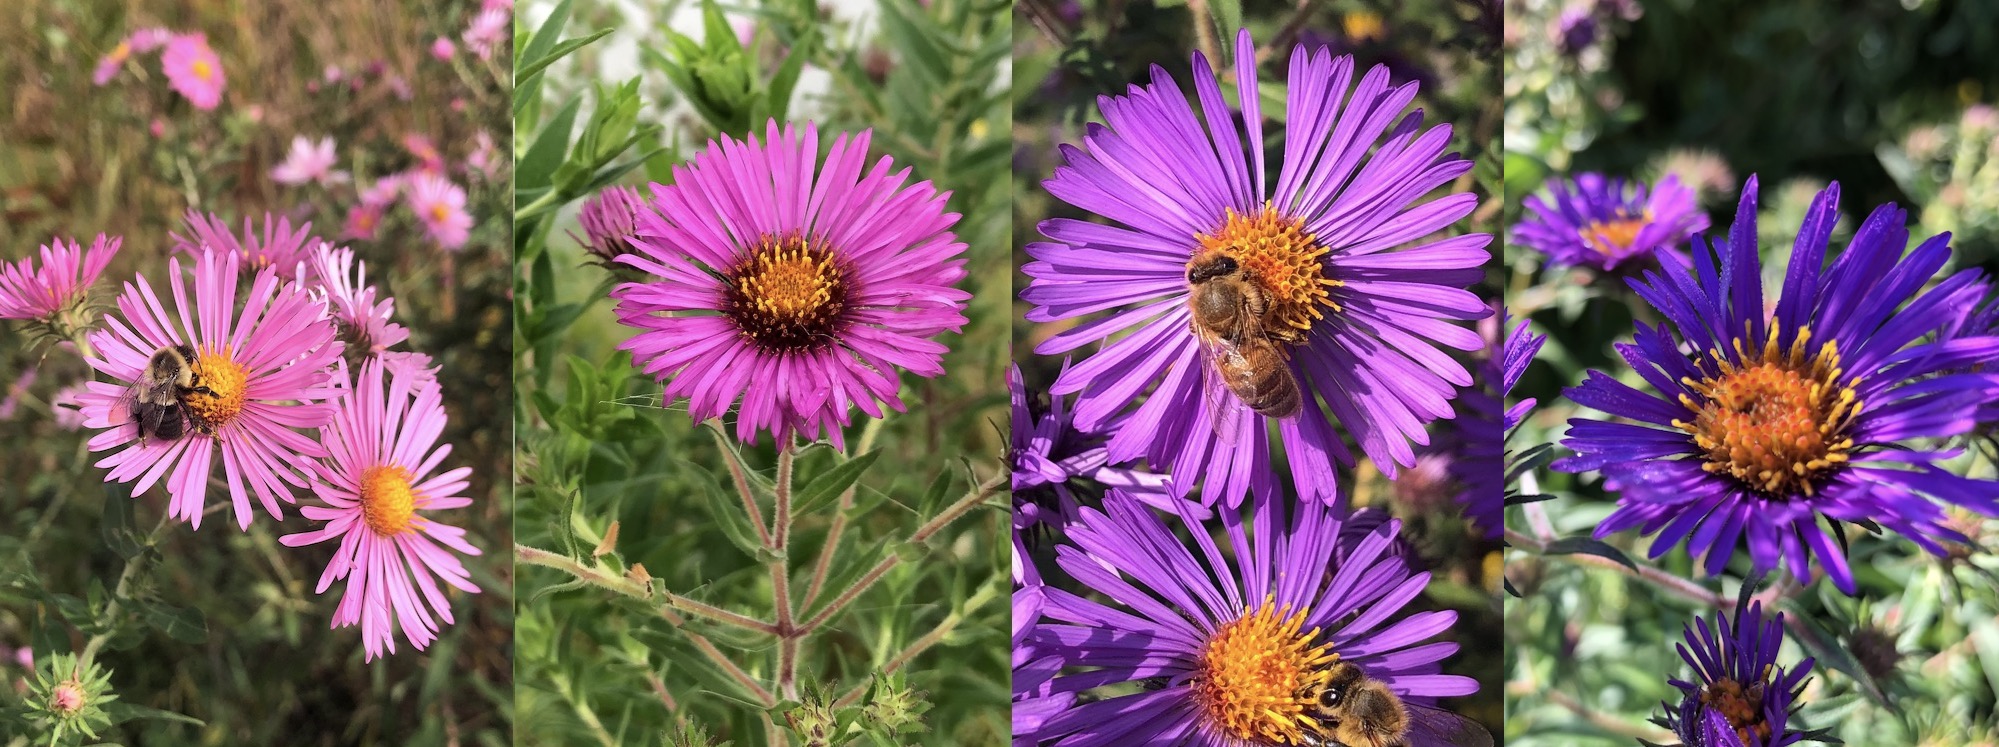 Sample color range of New England Aster flowers.